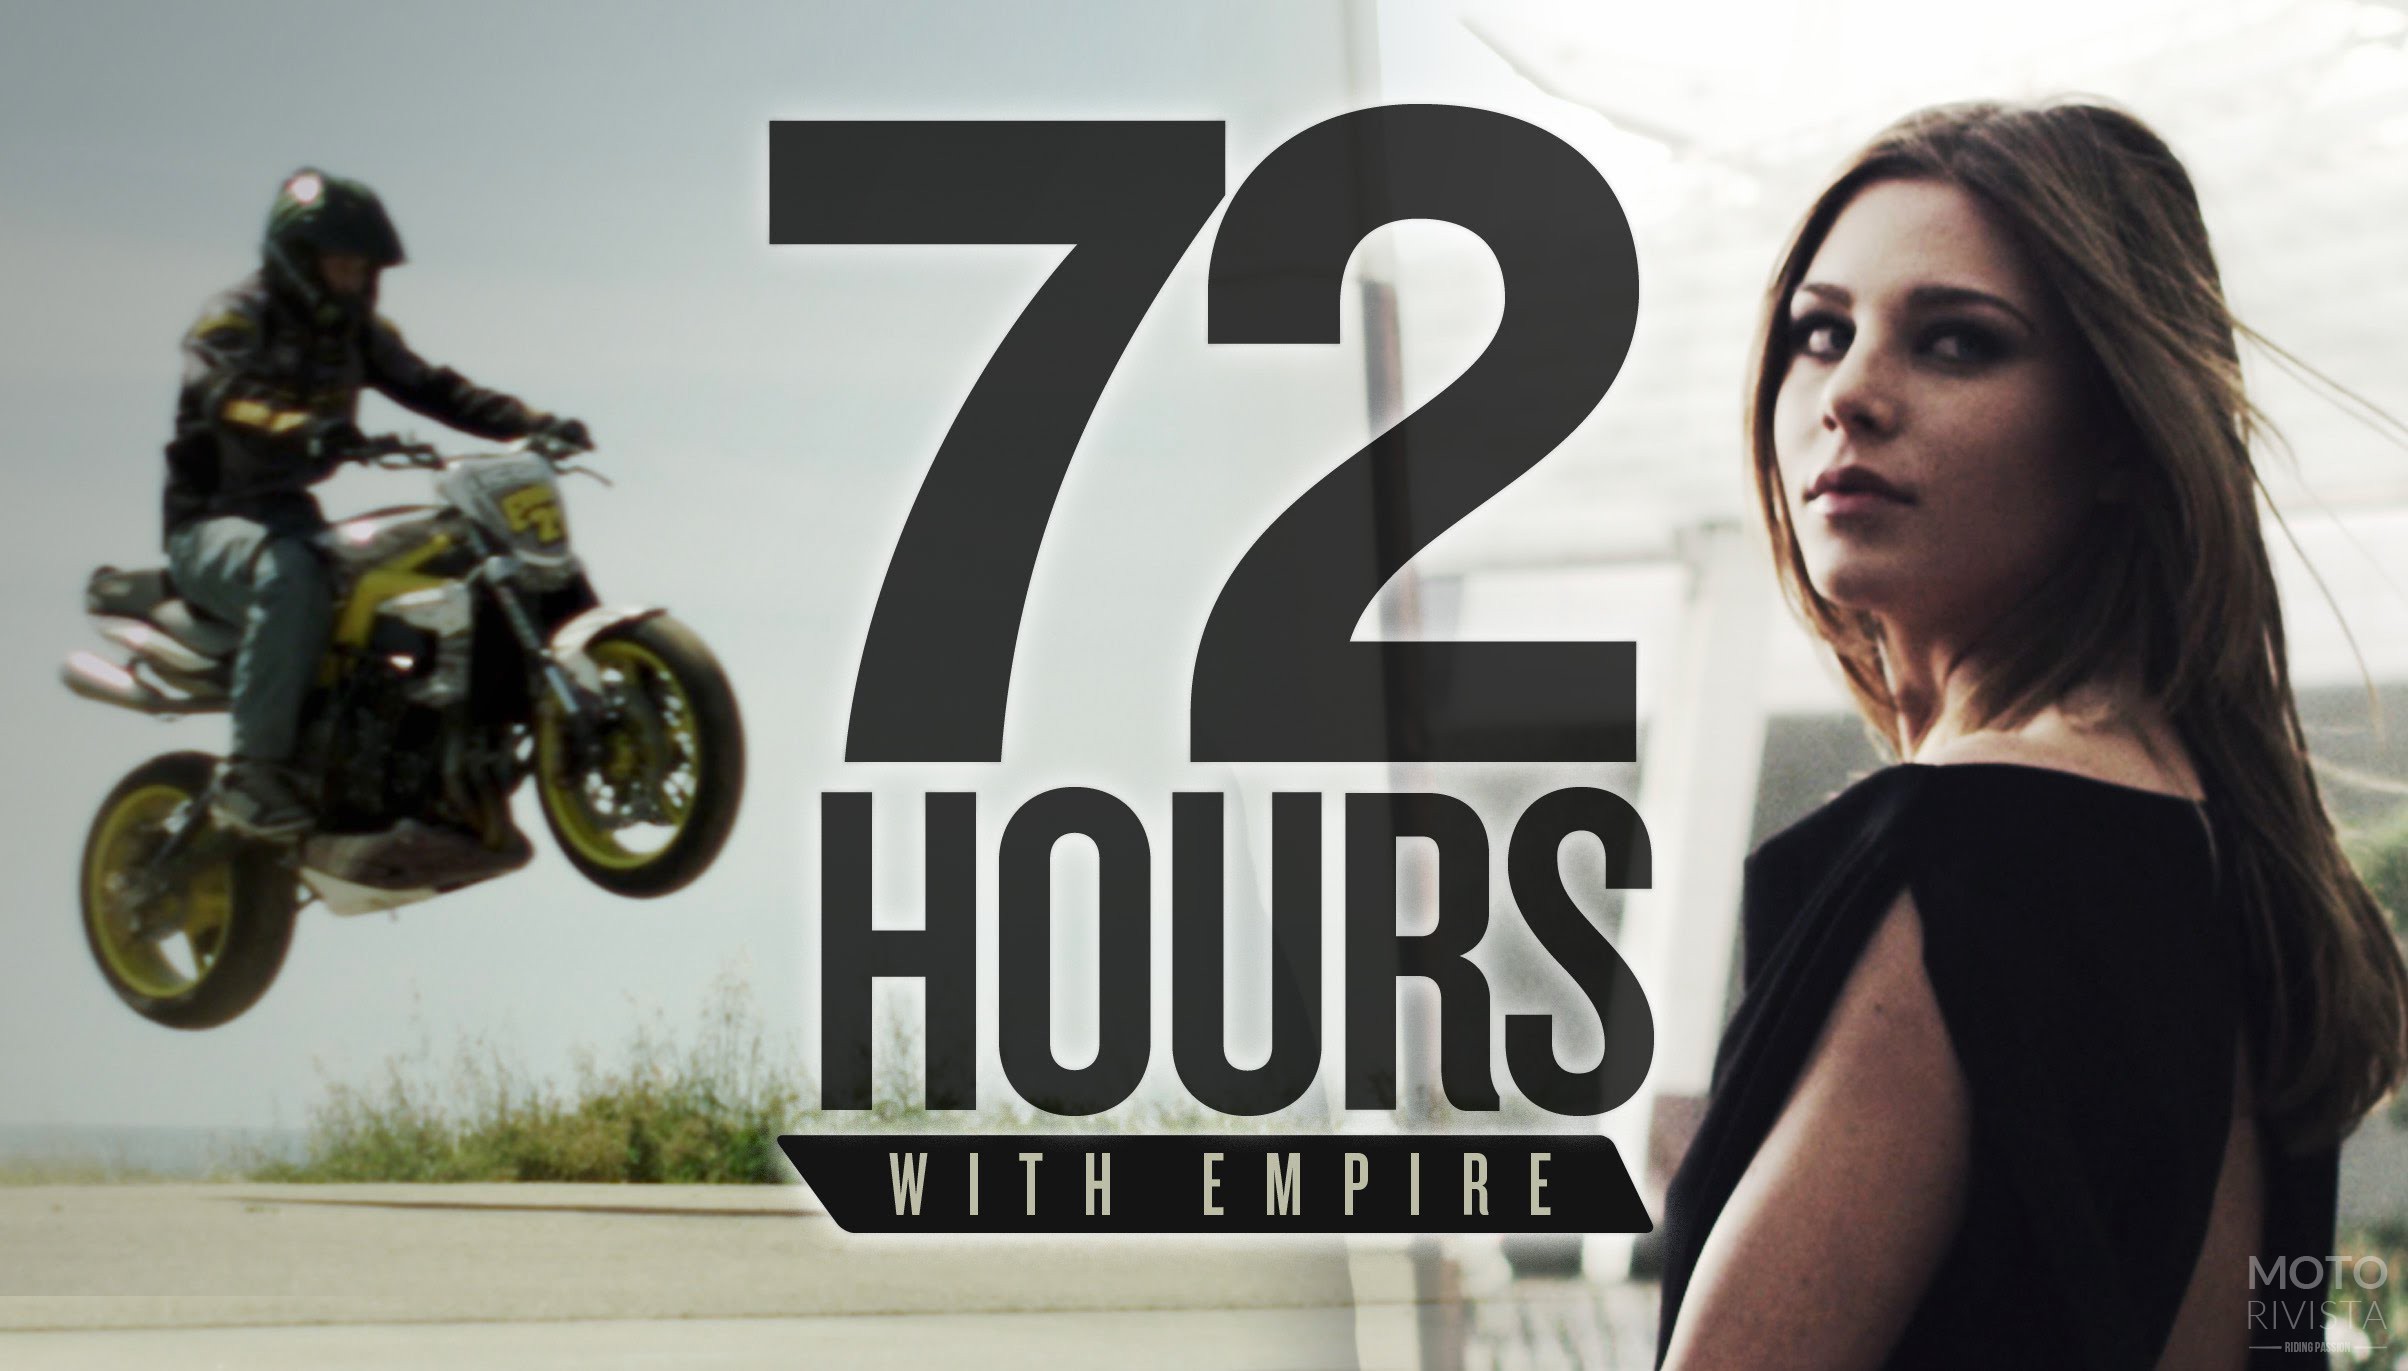 72 Hours with Empire, A sportbike freestyle Video film